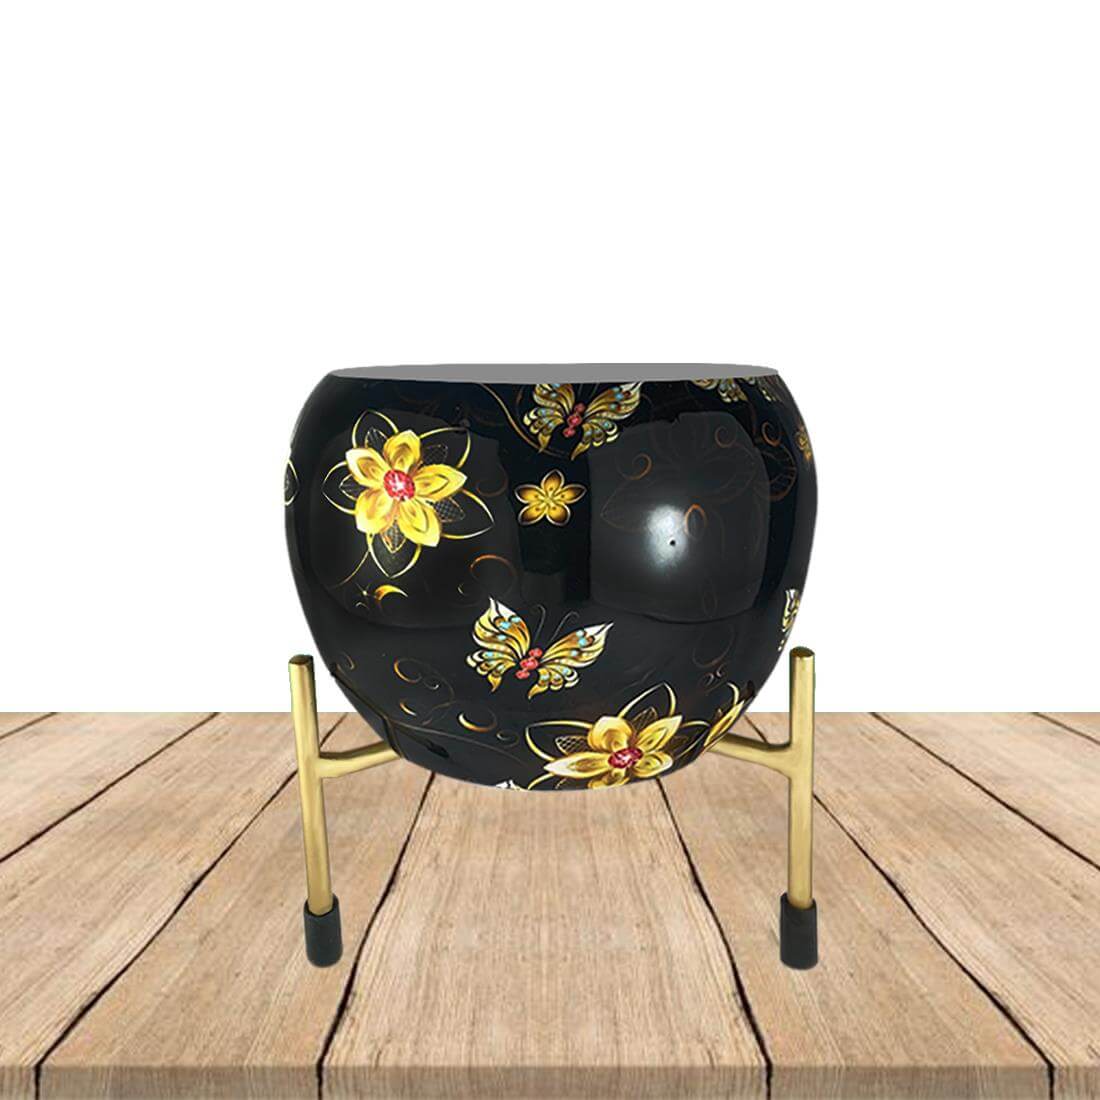 APPLE DESING FLOWER POT GOLDEN BUTTERFLY WITH STAND